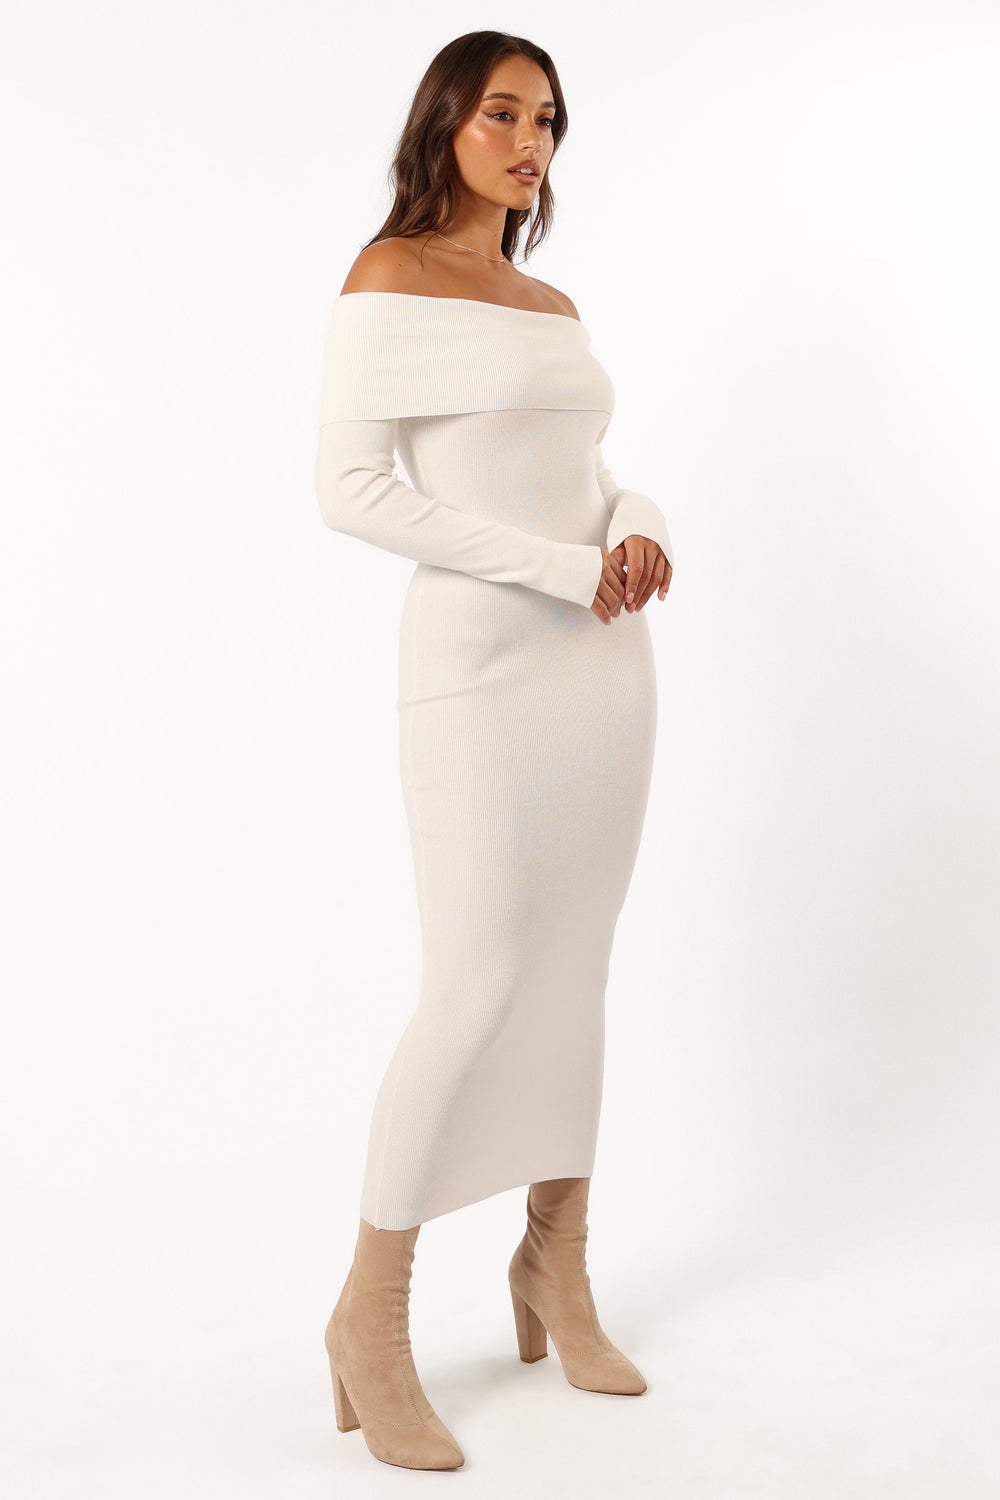 DRESSES @Archie Off The Shoulder Midi Dress - White (Hold for Cool Beginnings)